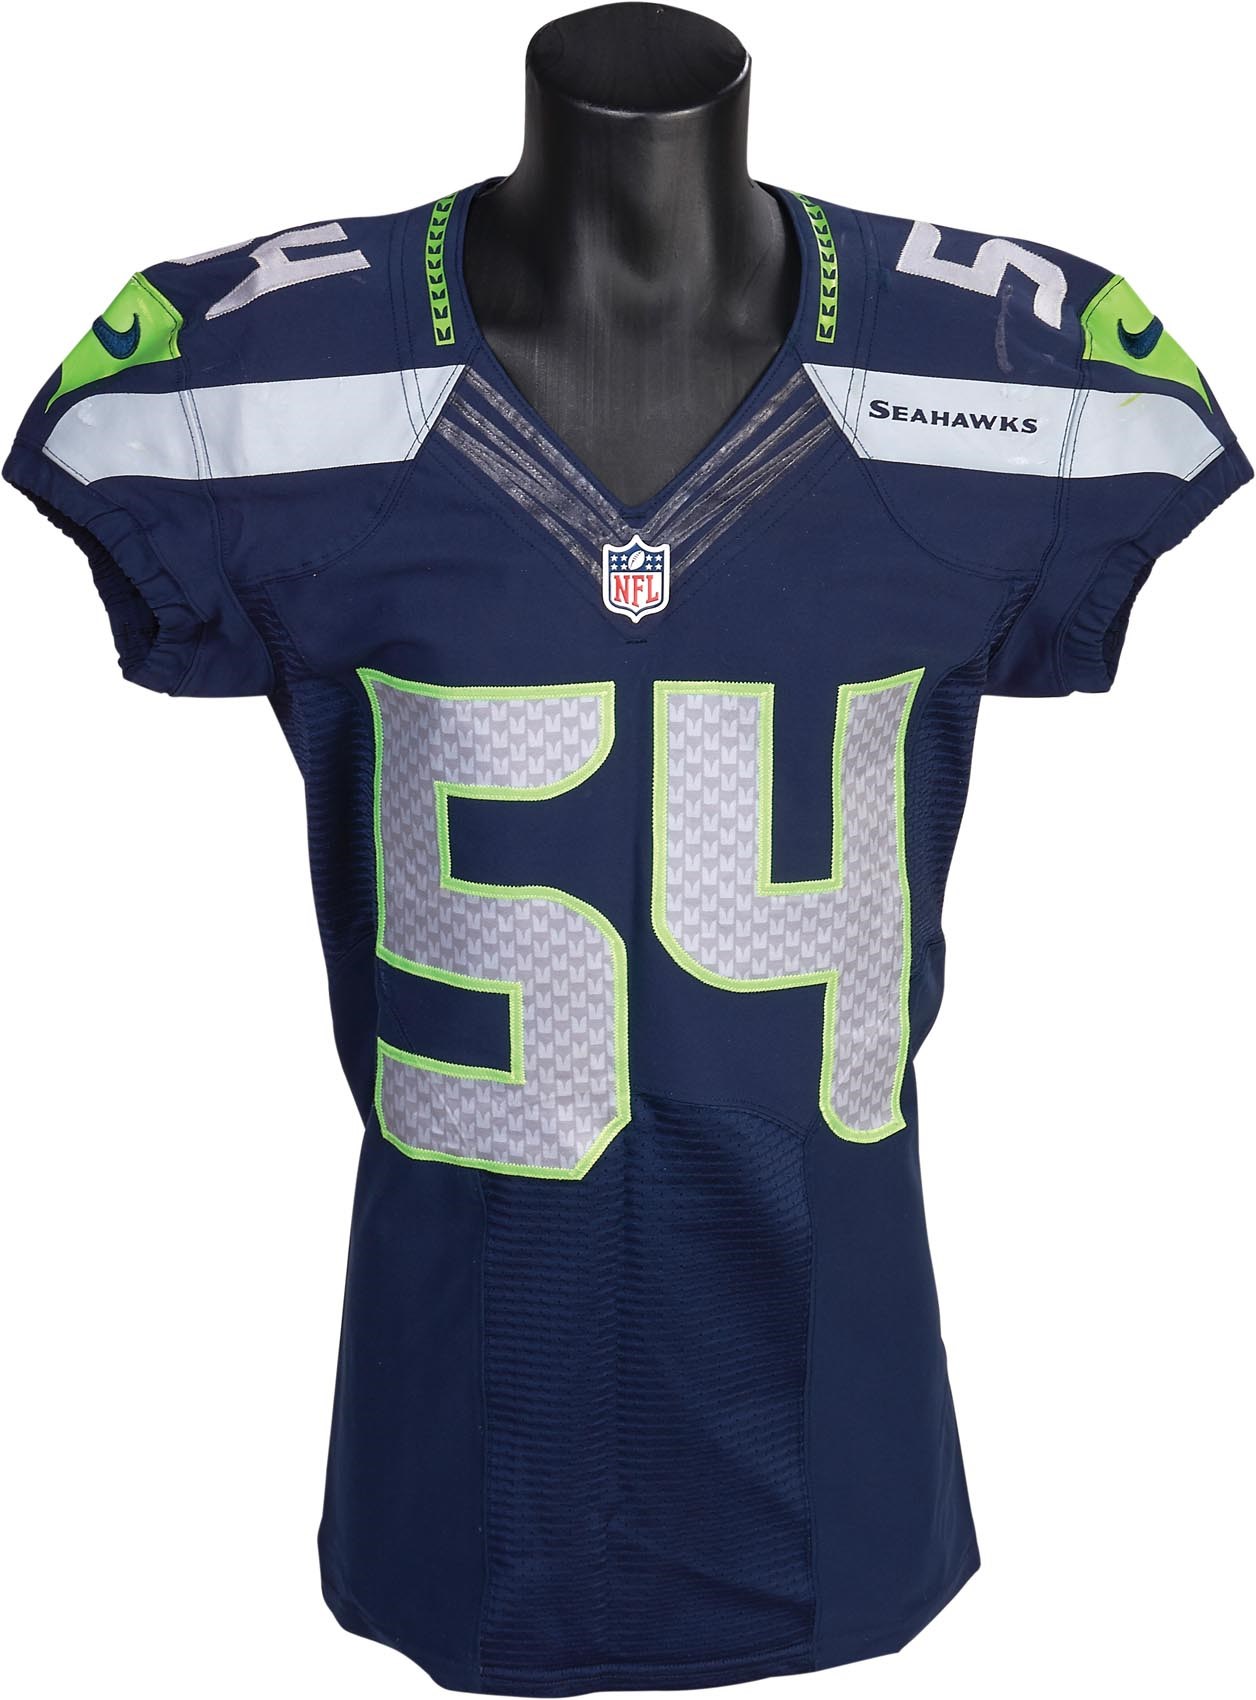 2012 Bobby Wagner Signed Game Worn Seahawks Jersey